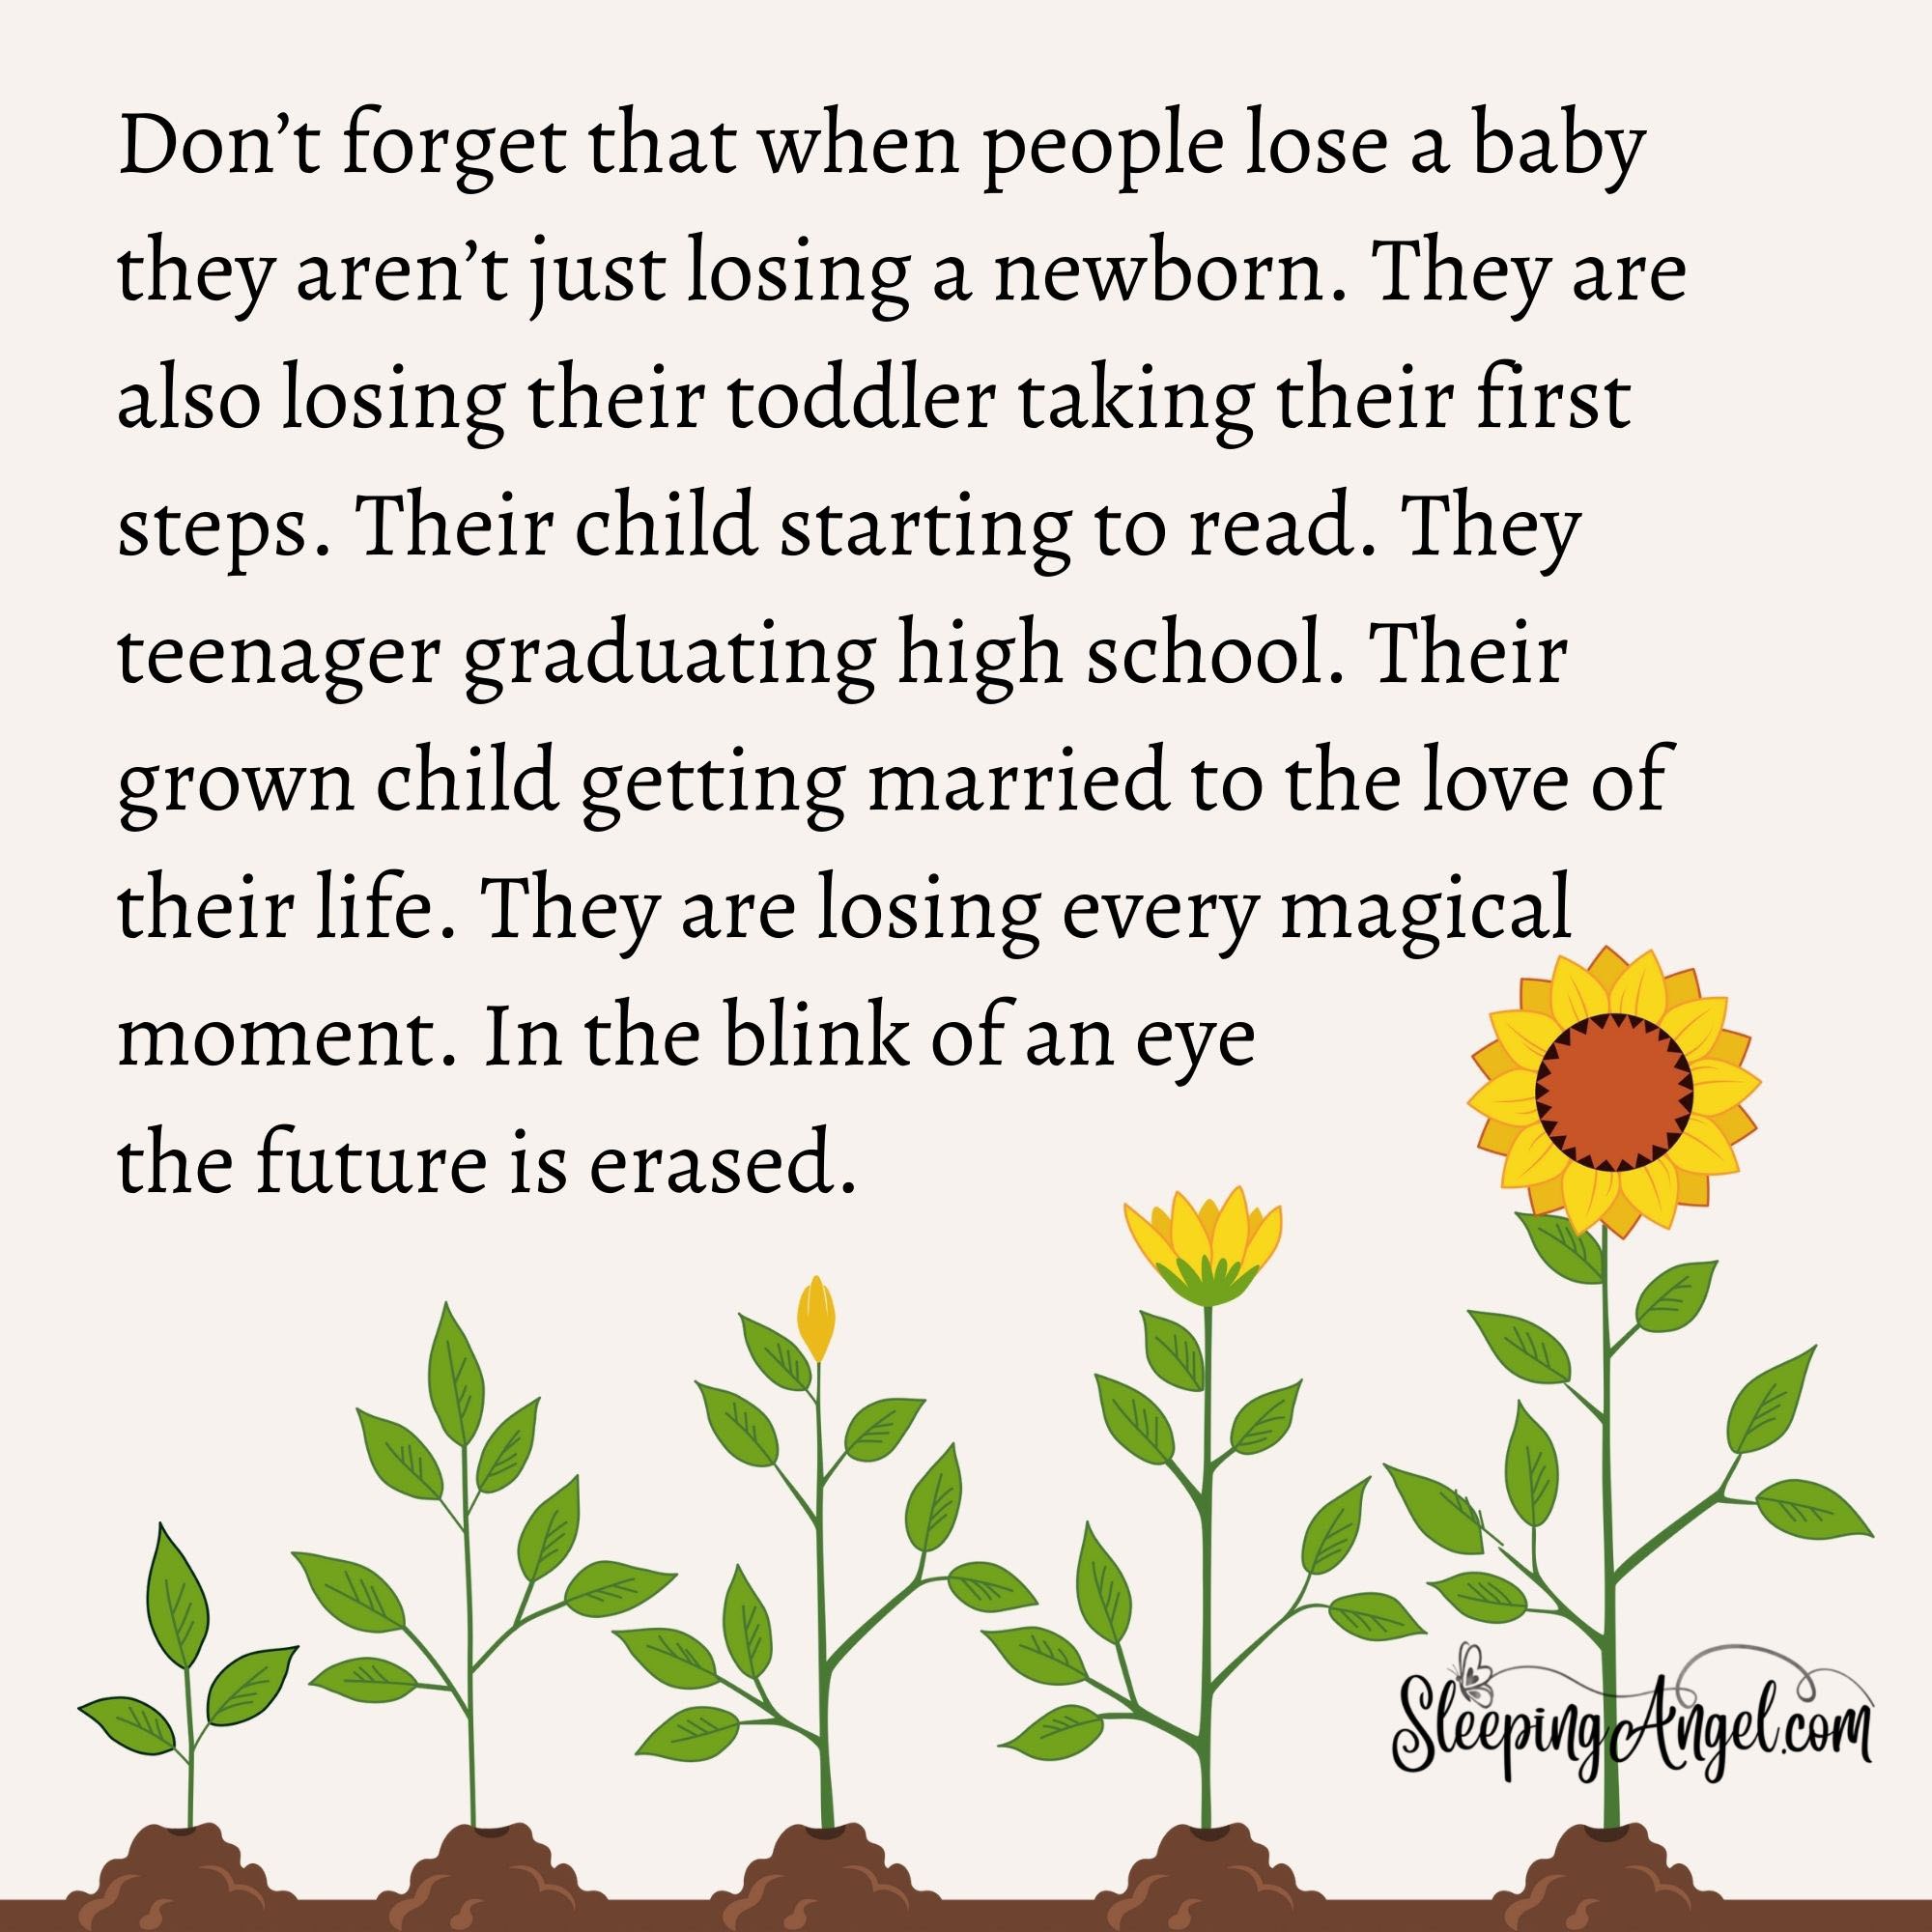 quotes about leaving high school